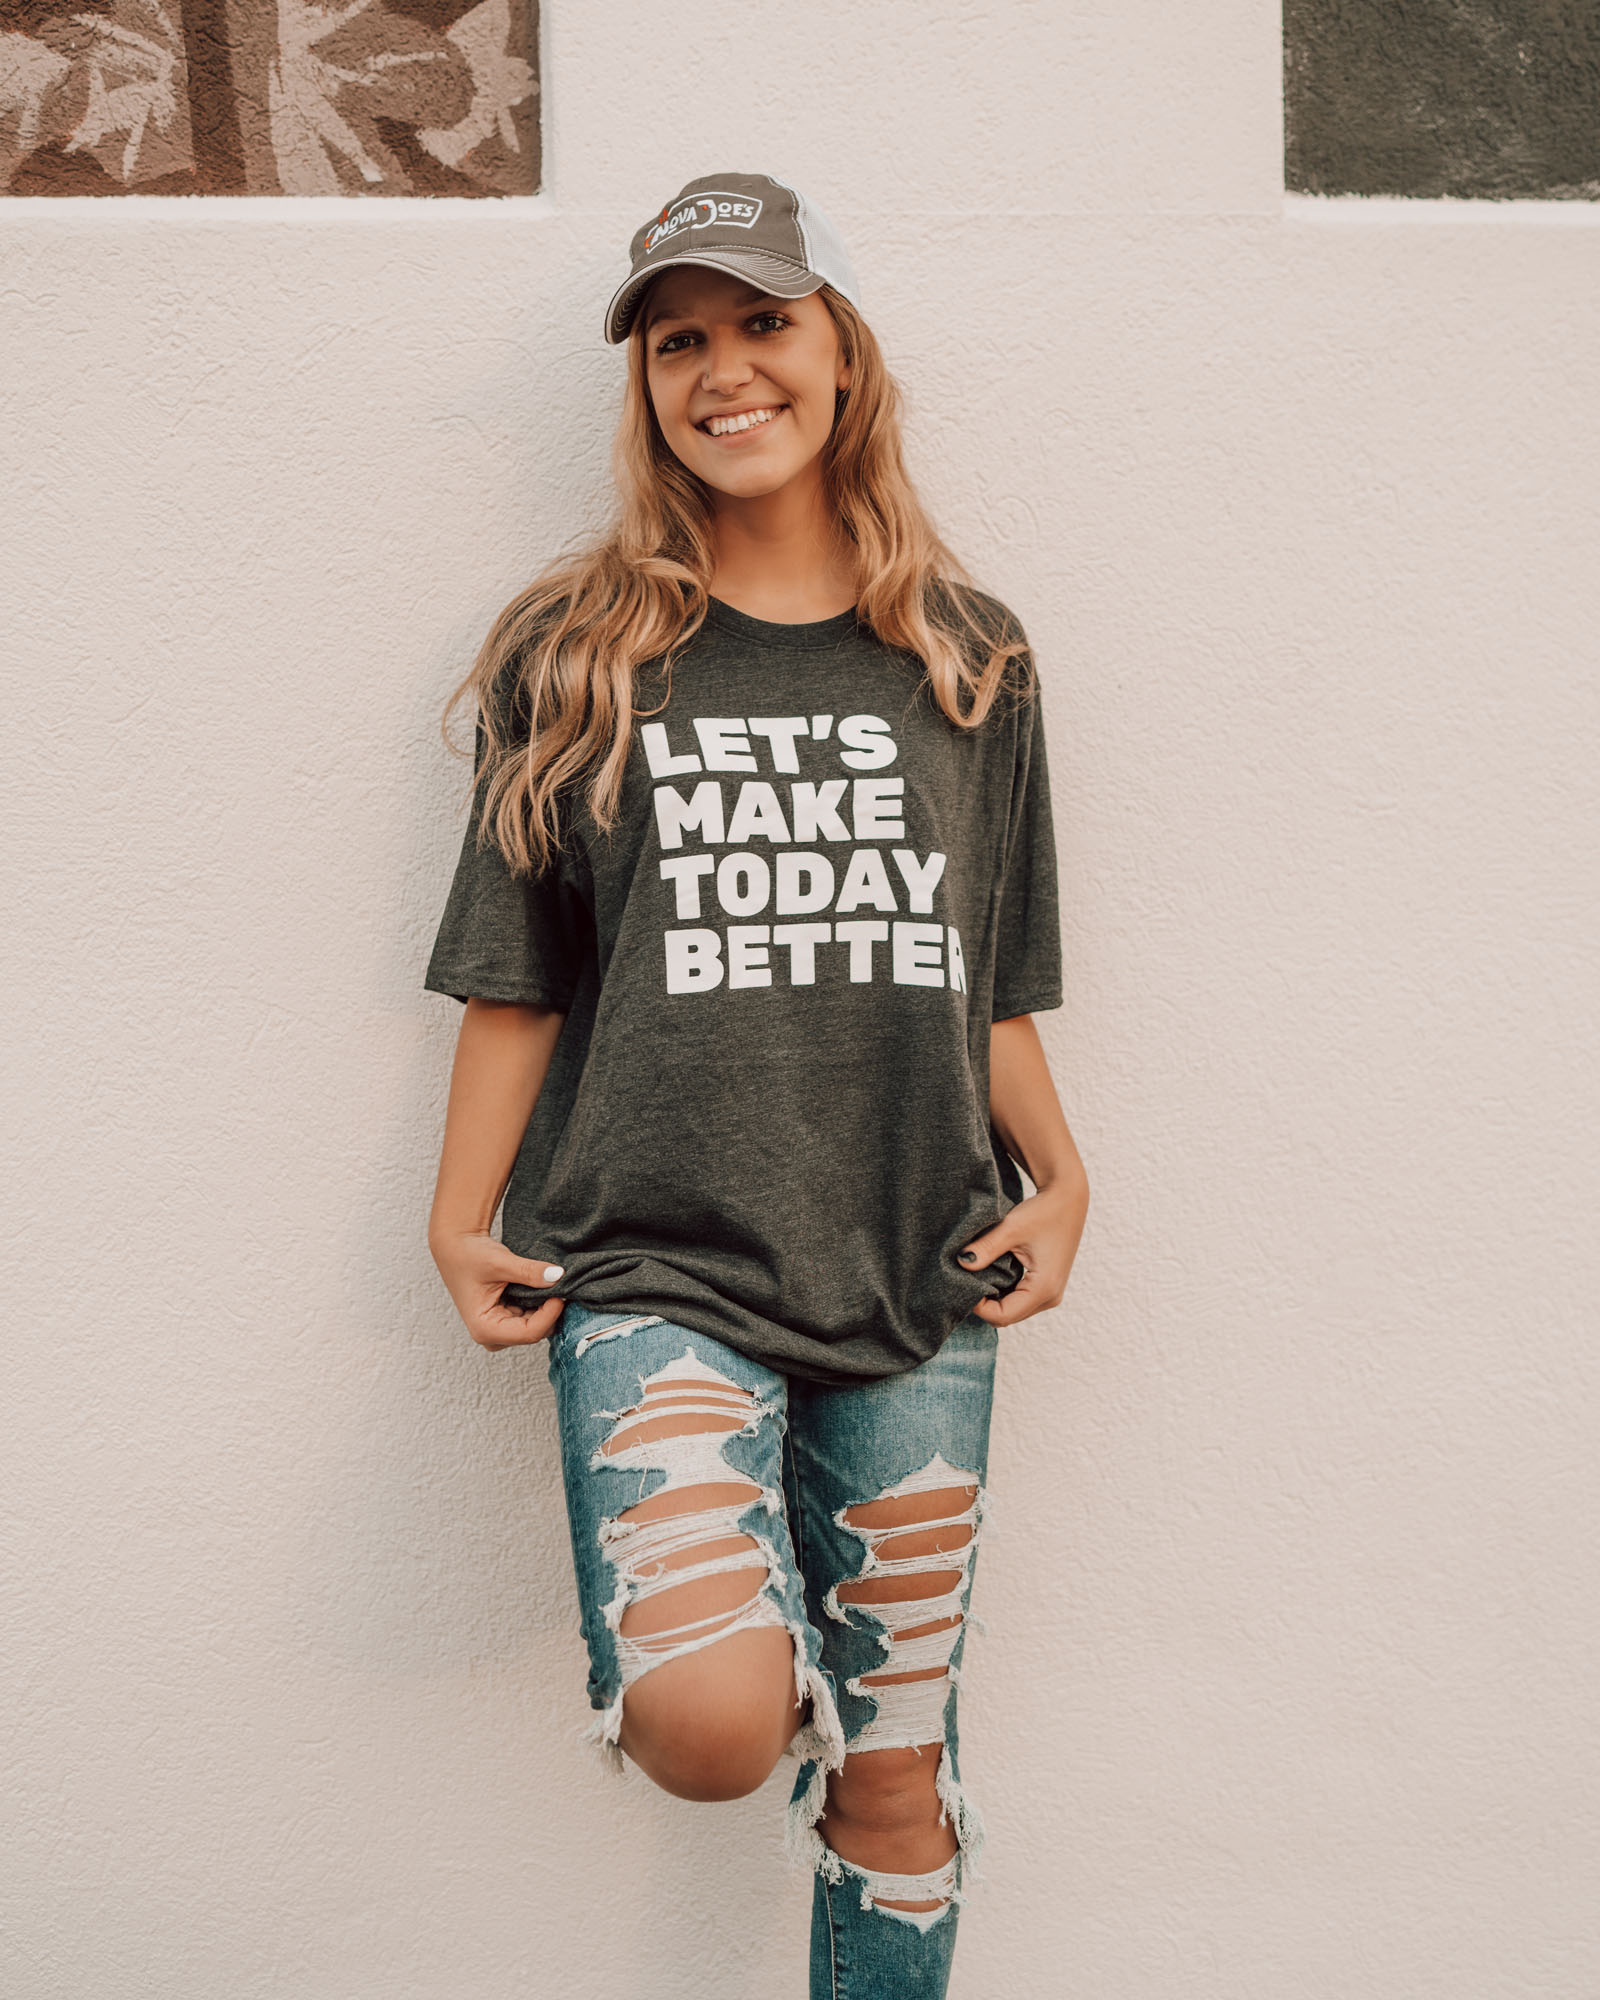 Let's Make Today Better Shirt